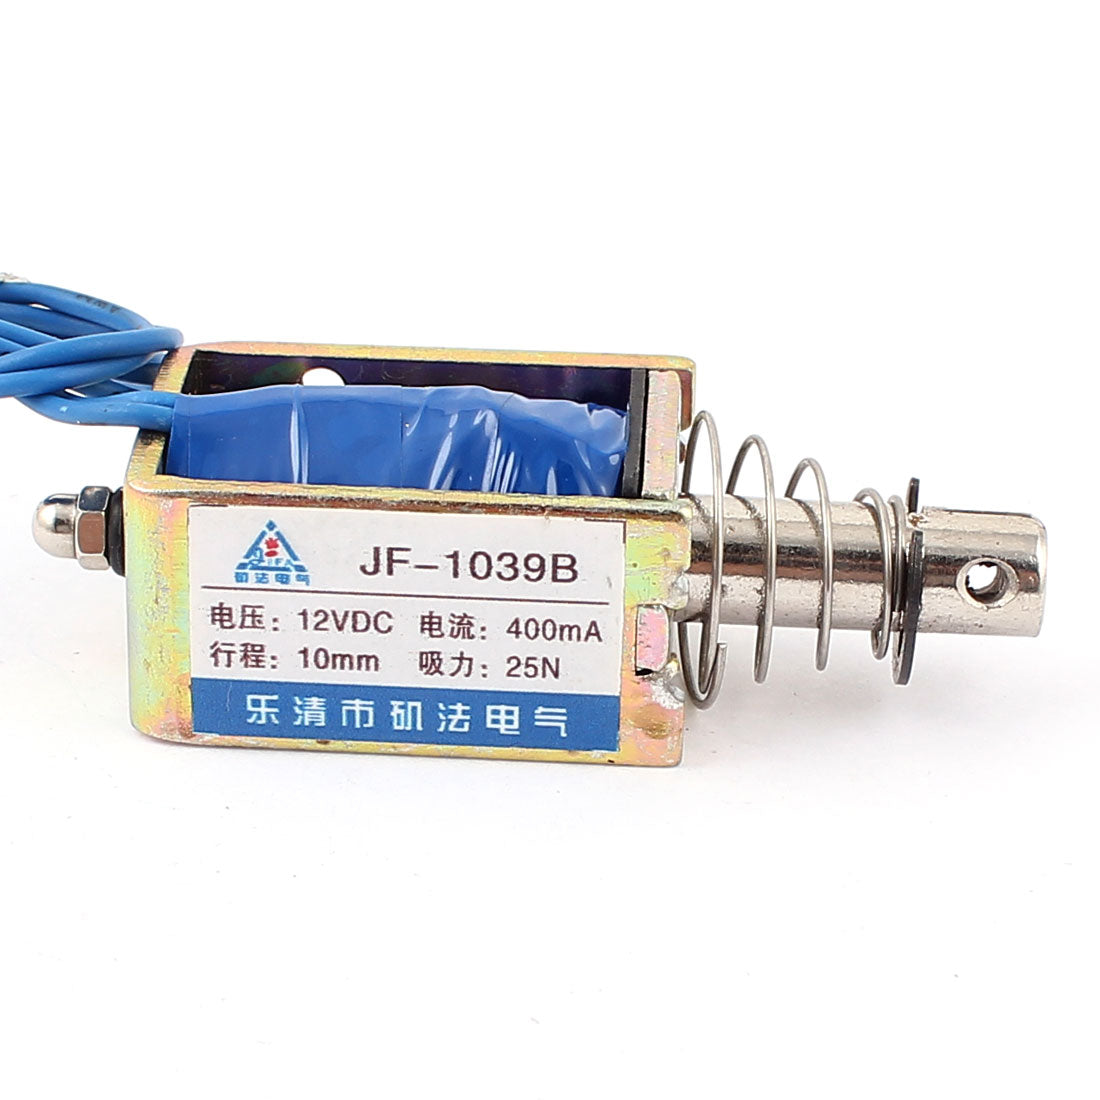 uxcell Uxcell JF-1039B DC 12V 400mA 25N/10mm Pull Push Type Open Frame Solenoid Electromagnet